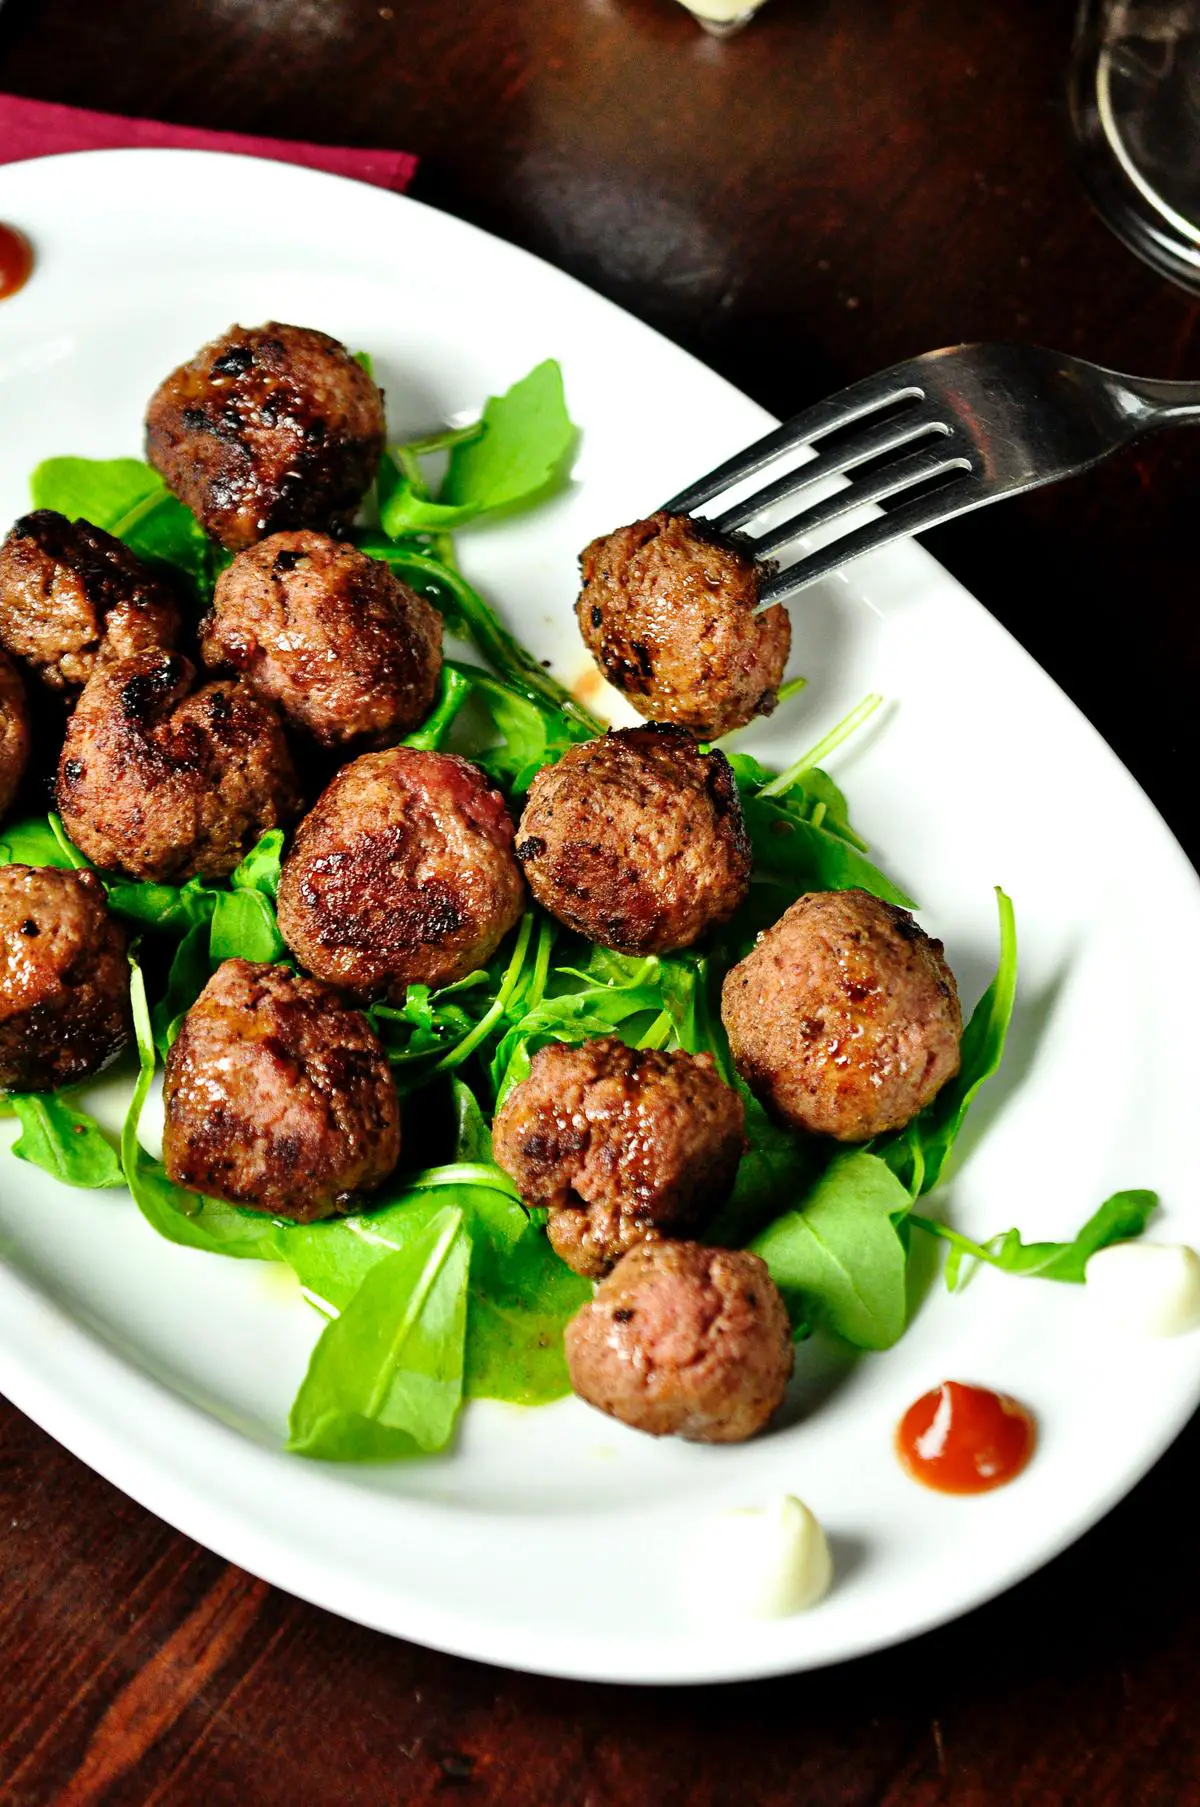 Image of IKEA's meatballs, showcasing their deliciousness and inviting appearance